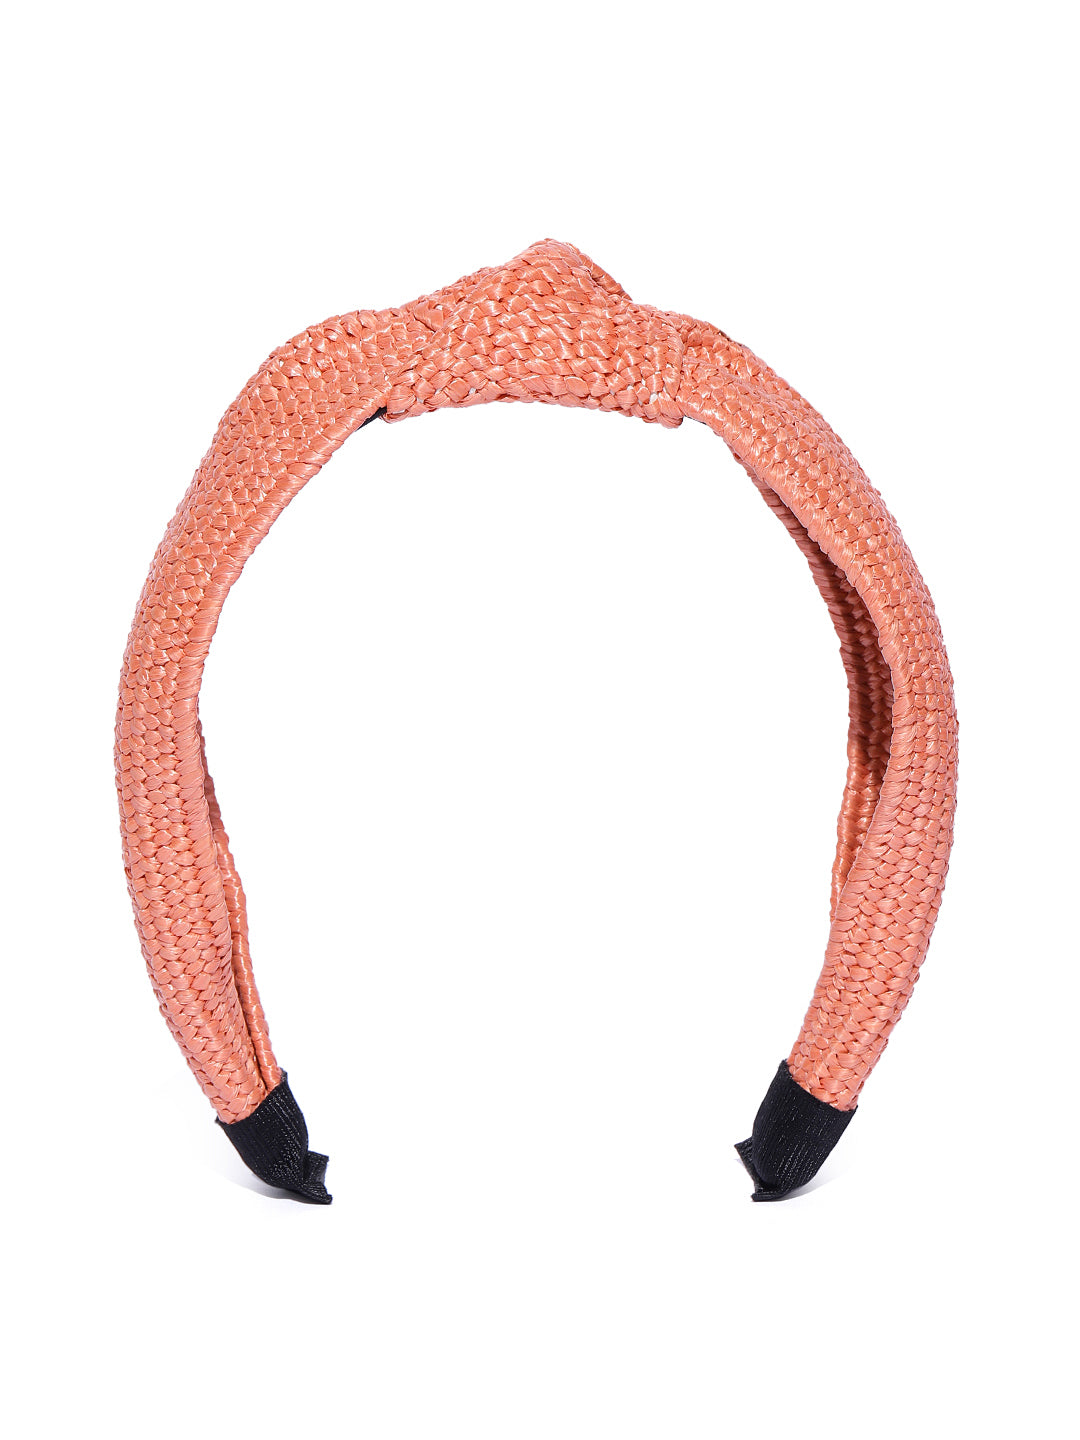 Blueberry Coral jute knot hair band